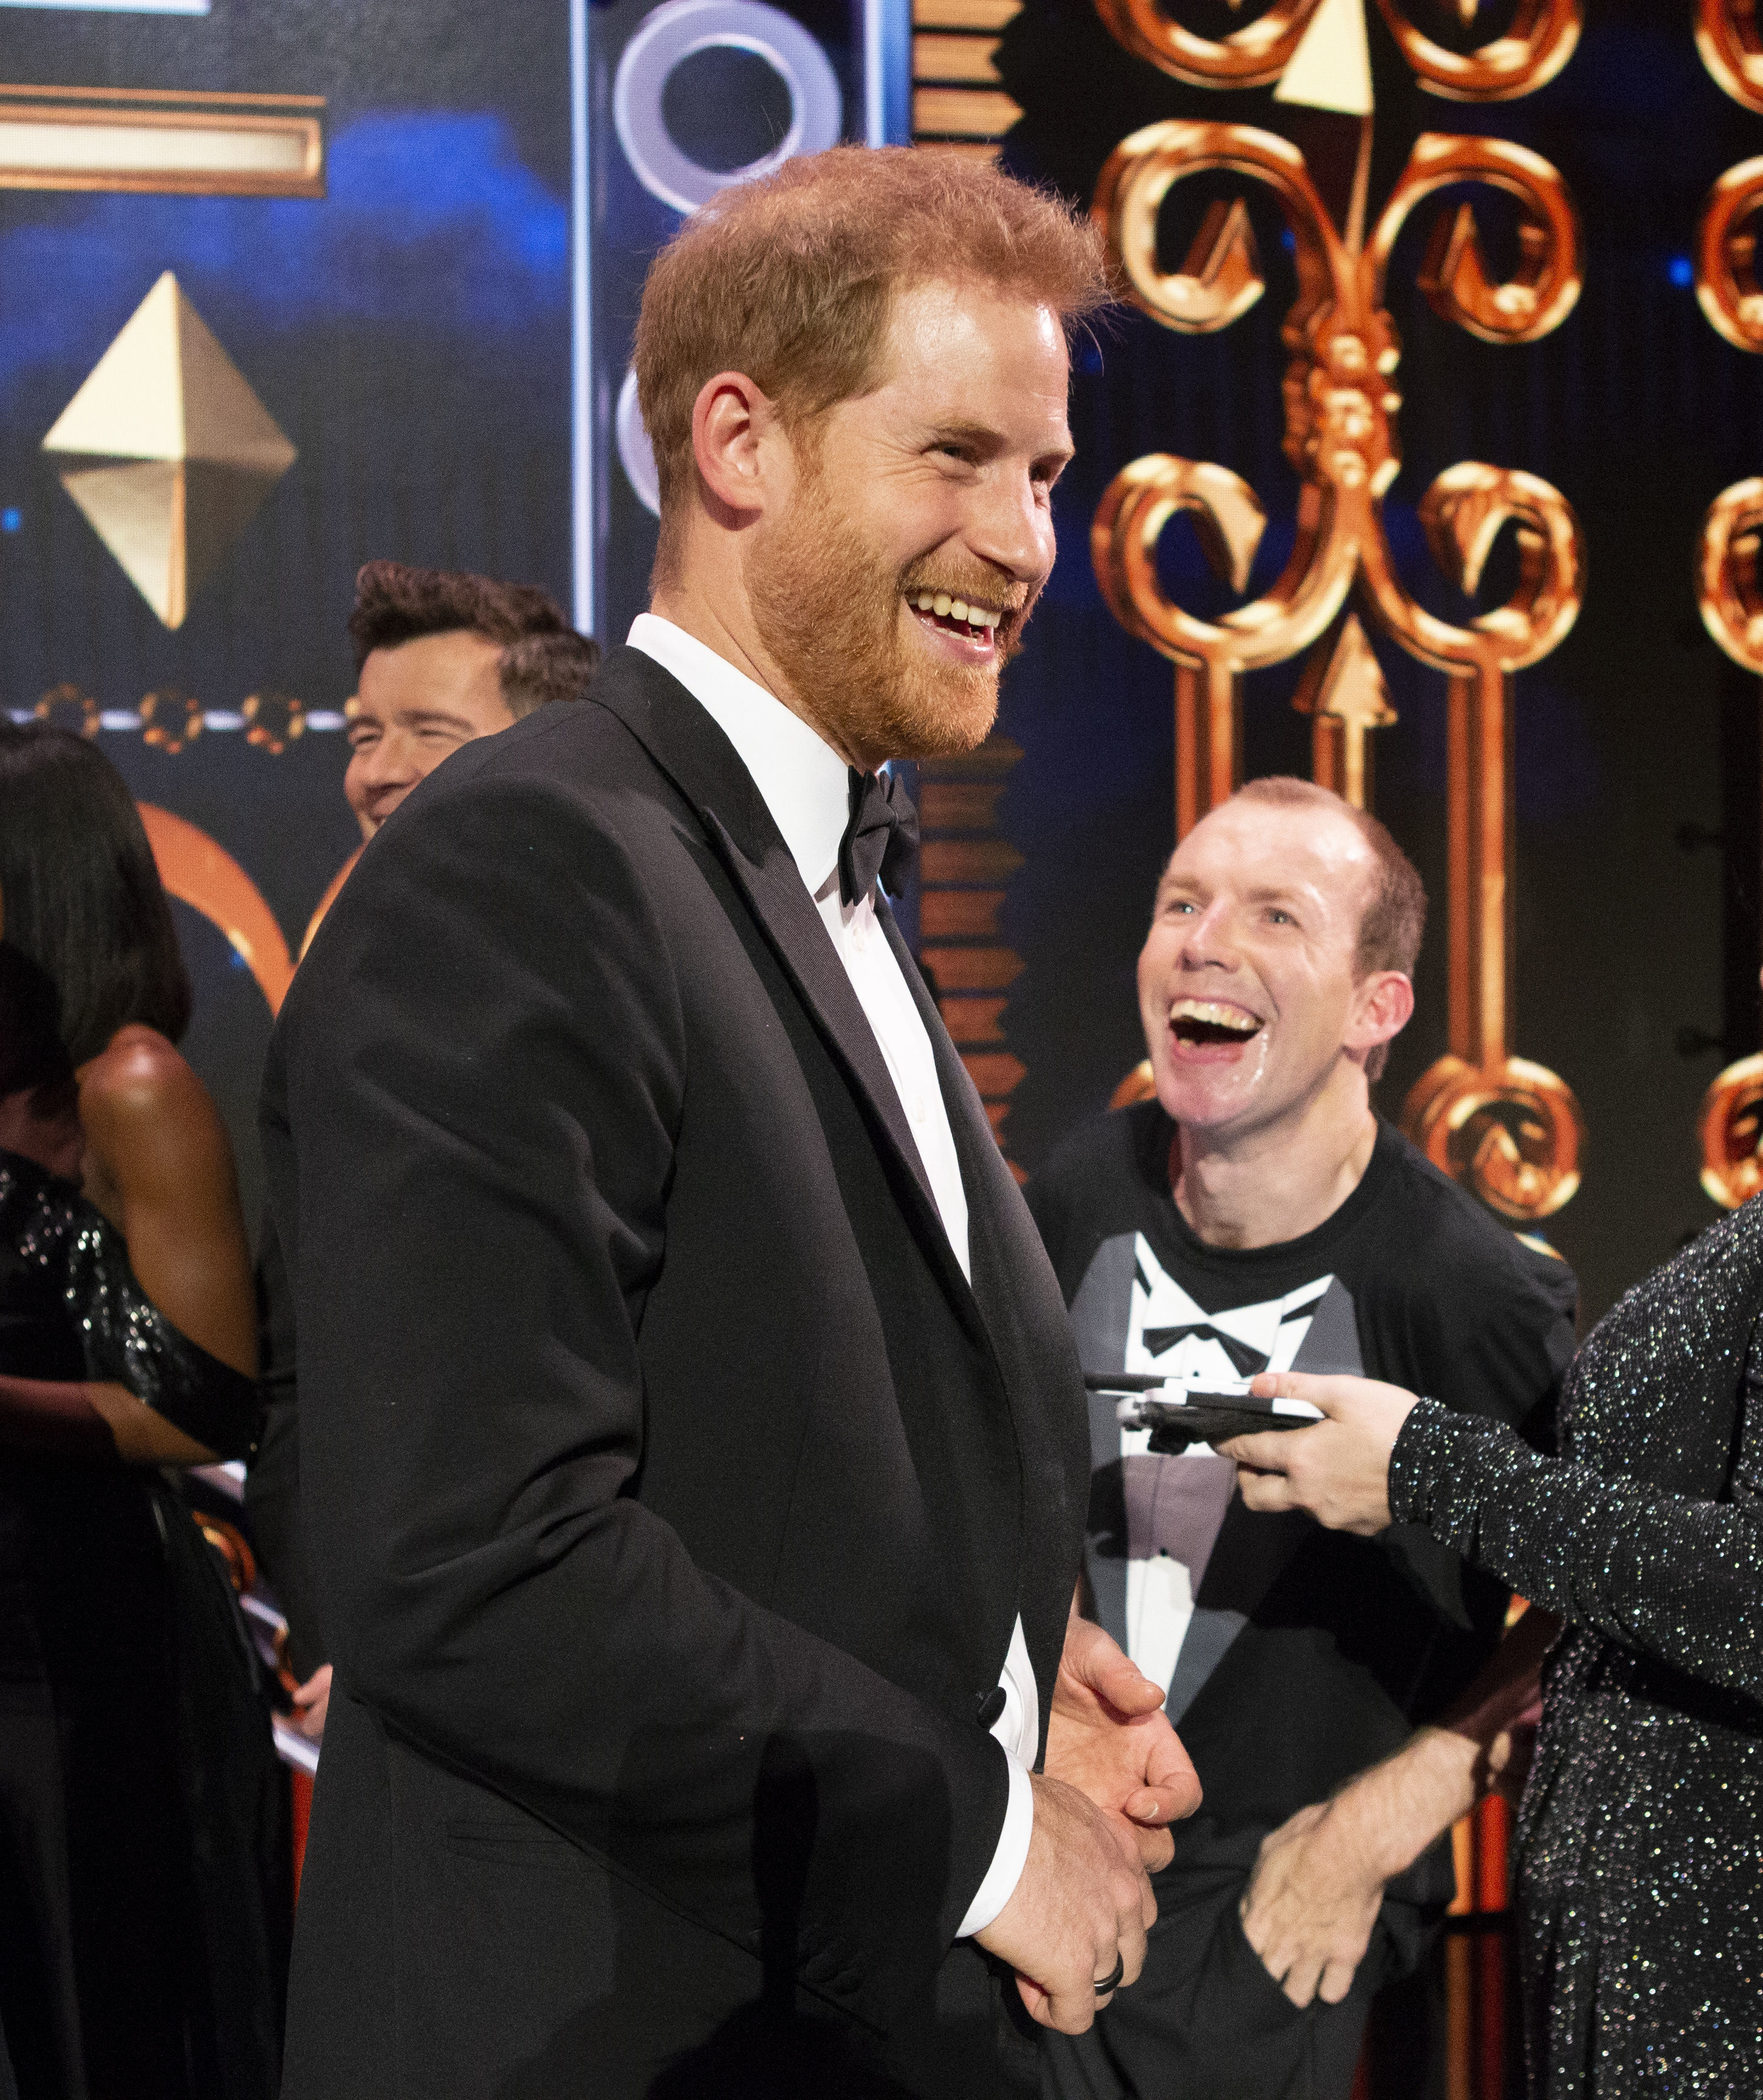 The Duke of Sussex meets Lost Voice Guy on stage at the Royal Variety Performance at the London Palladium in central London. 